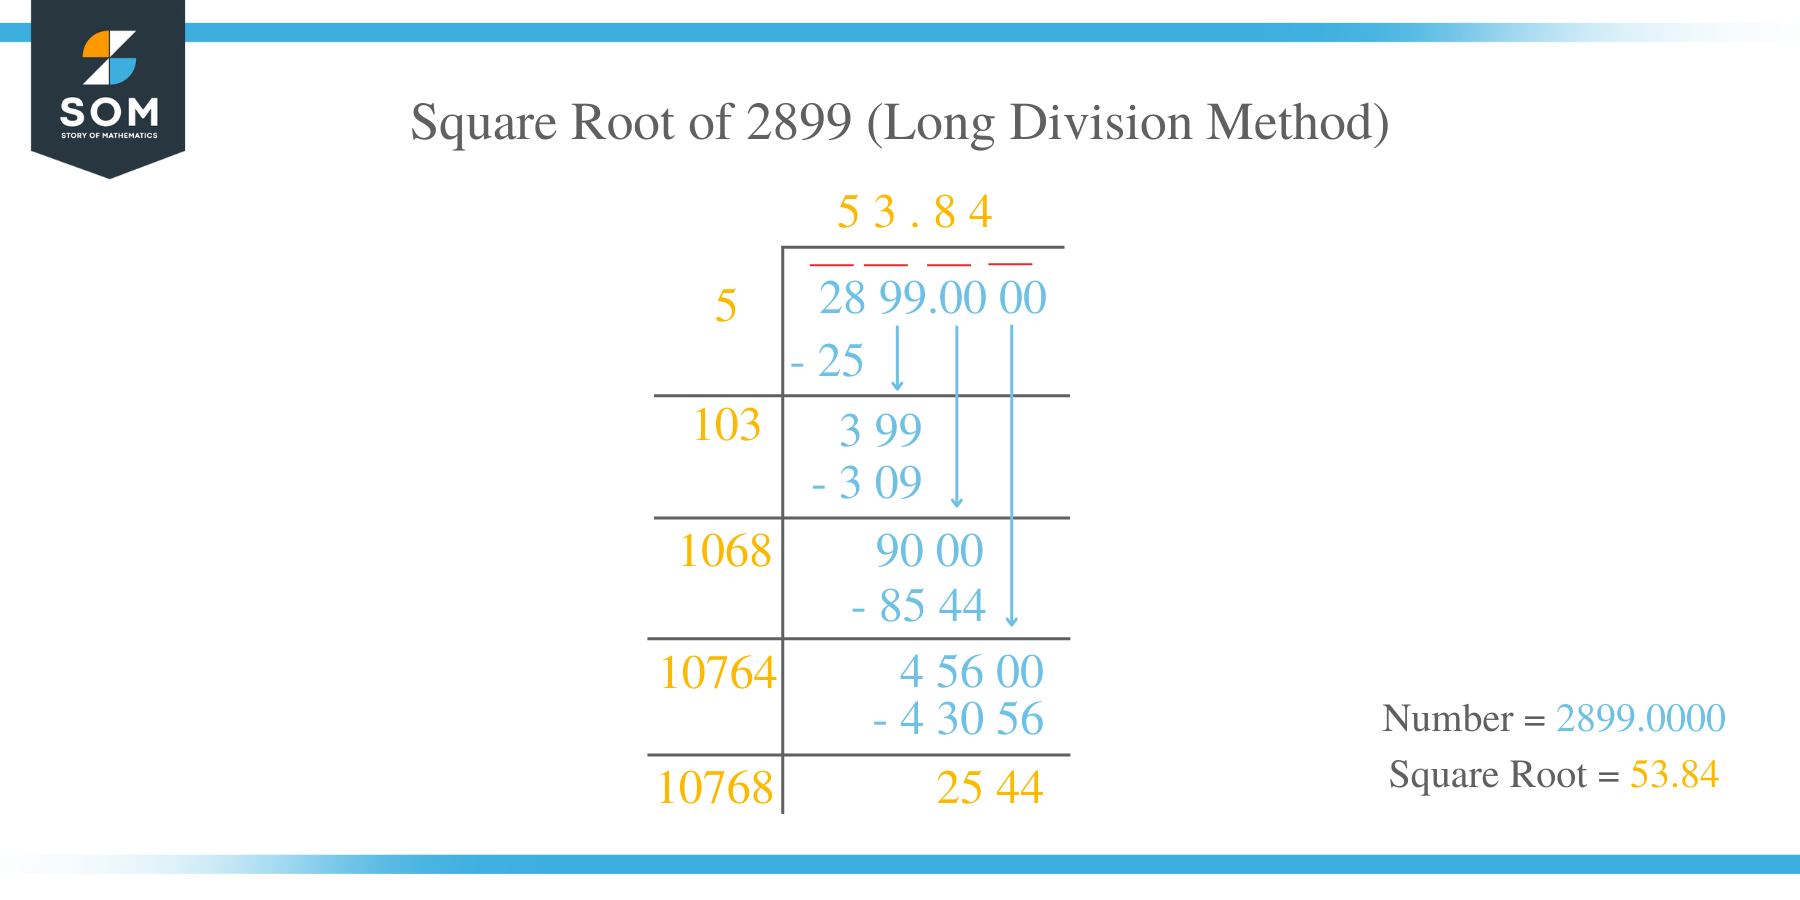 Square Root of 2899 by Long Division Method